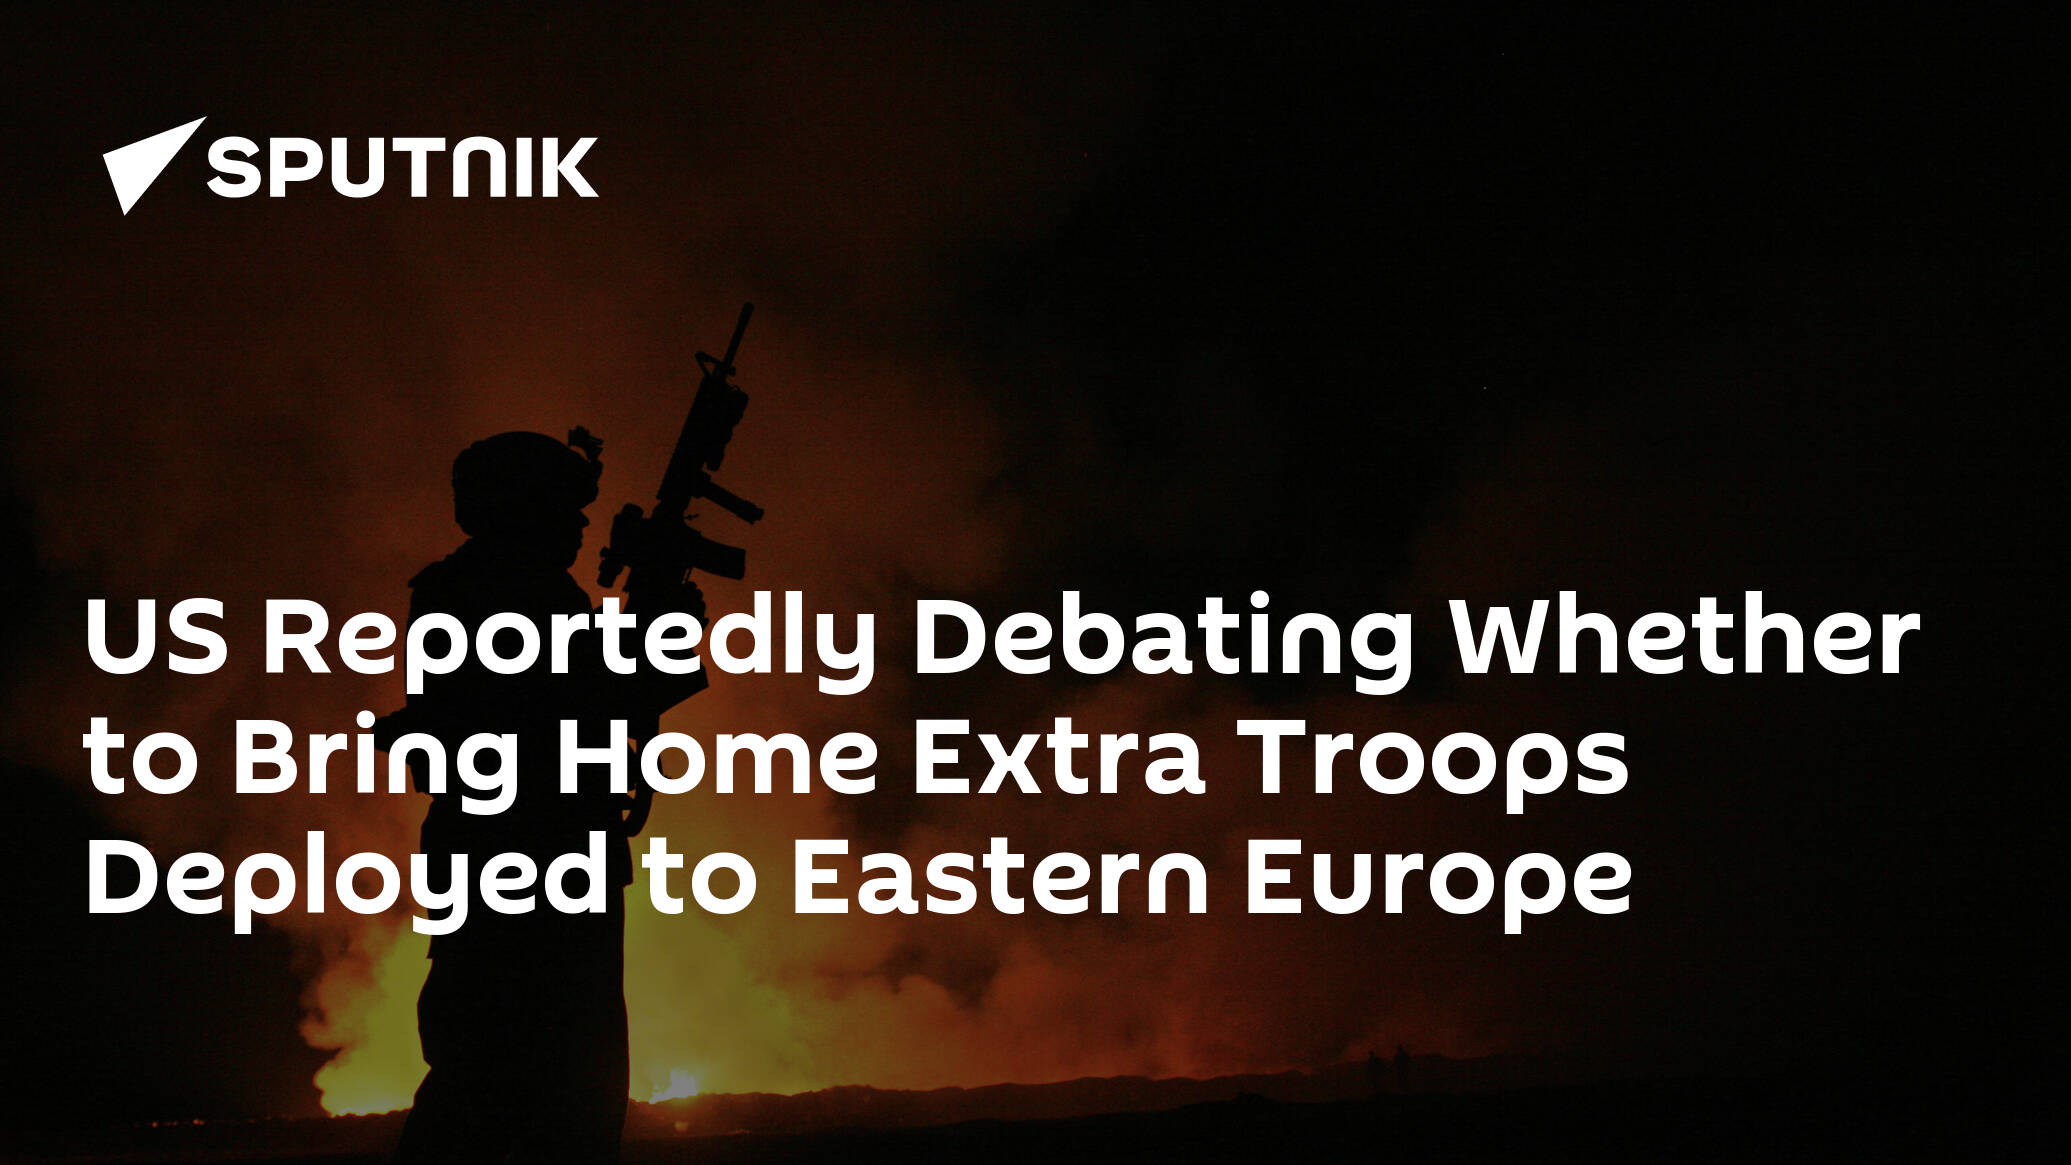 US Reportedly Debating Whether to Bring Home Extra Troops Deployed to Eastern Europe